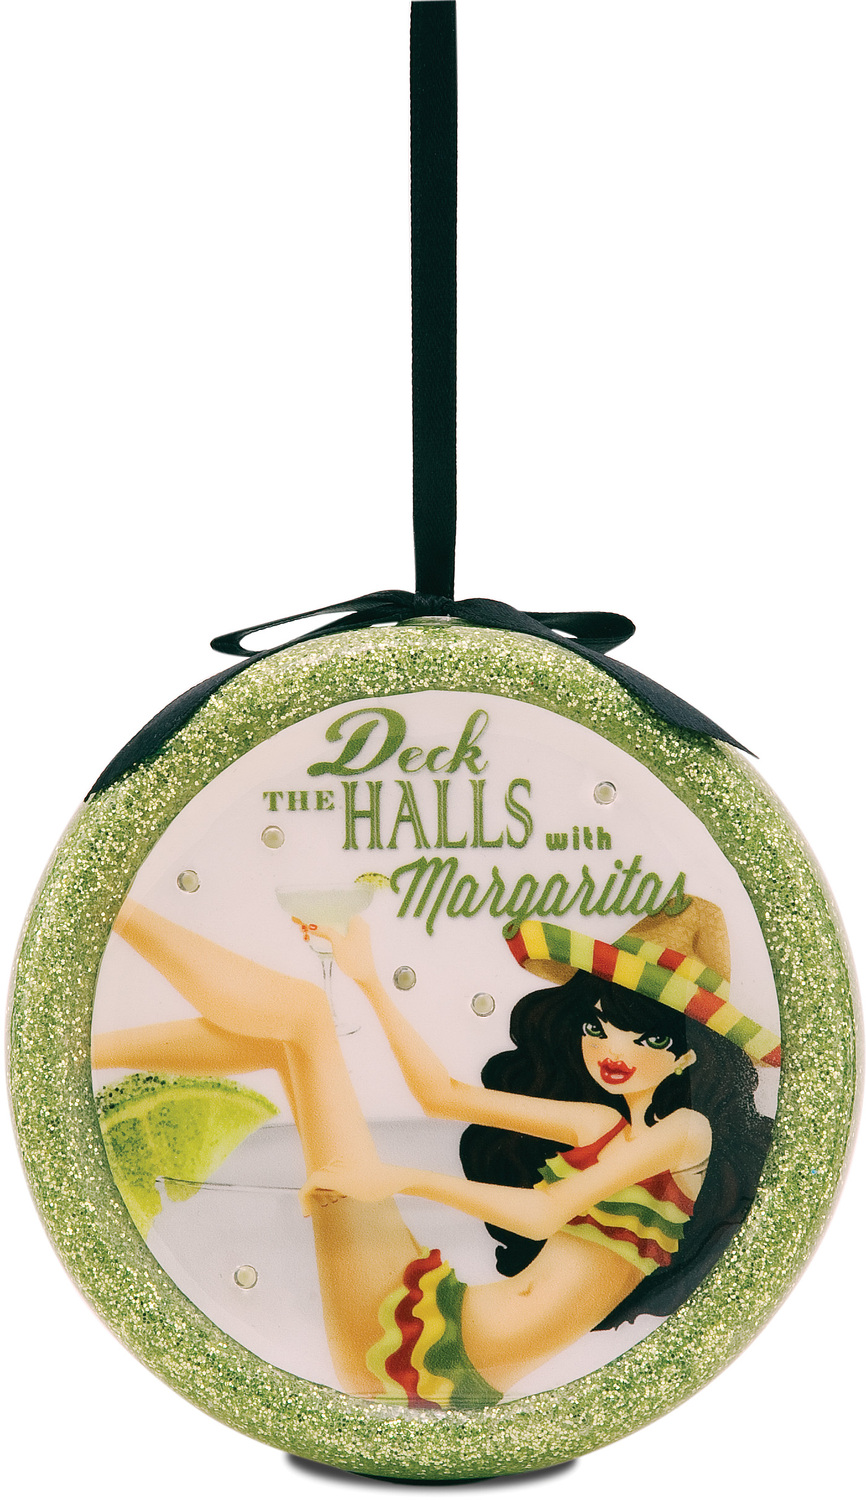 Deck the Halls by Hiccup - Deck the Halls - 120mm Blinking Ornament